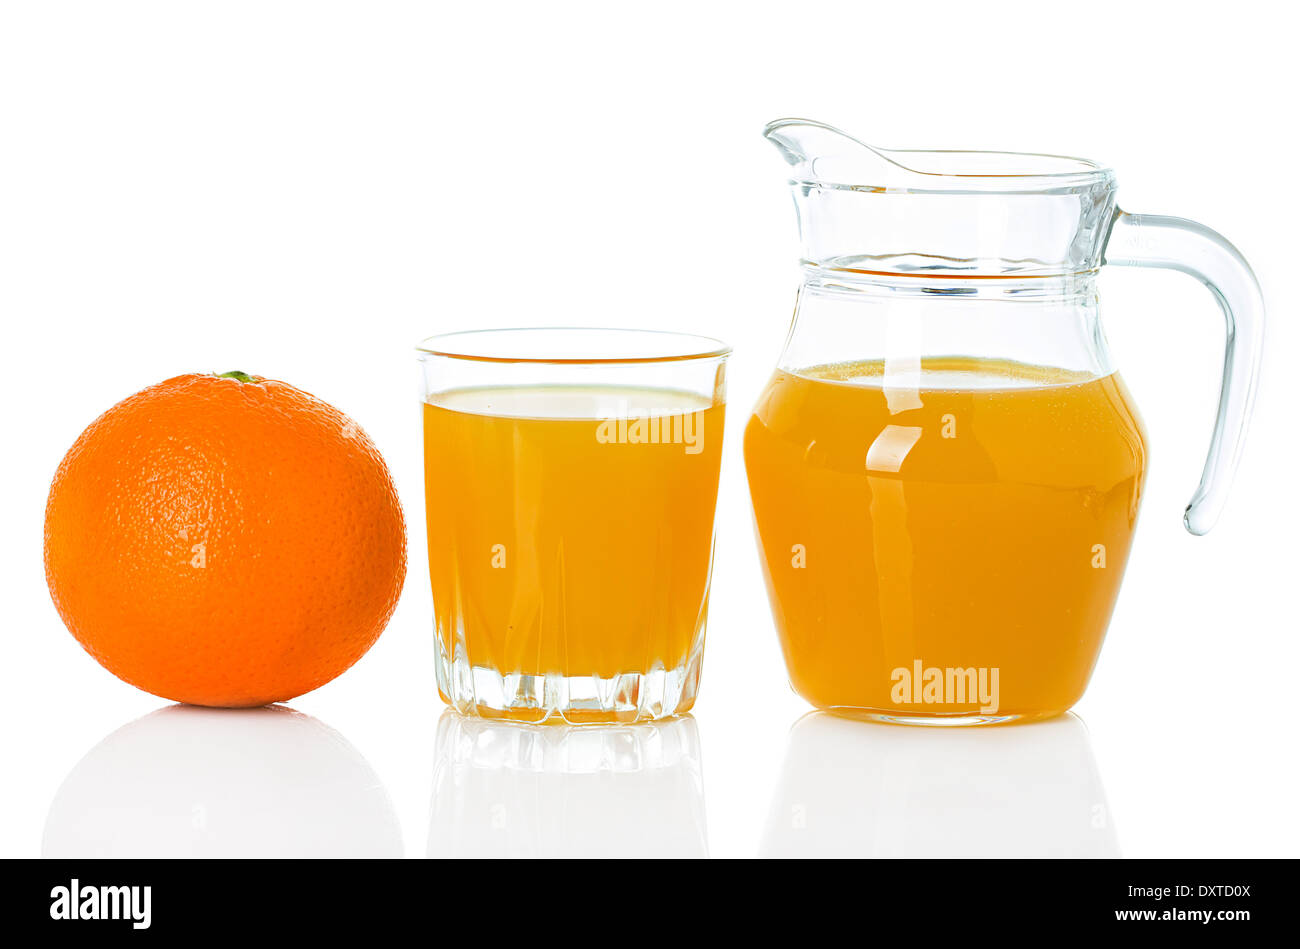 Jug and glass with orange juice isolated on white Stock Photo by ©alphacell  64390501